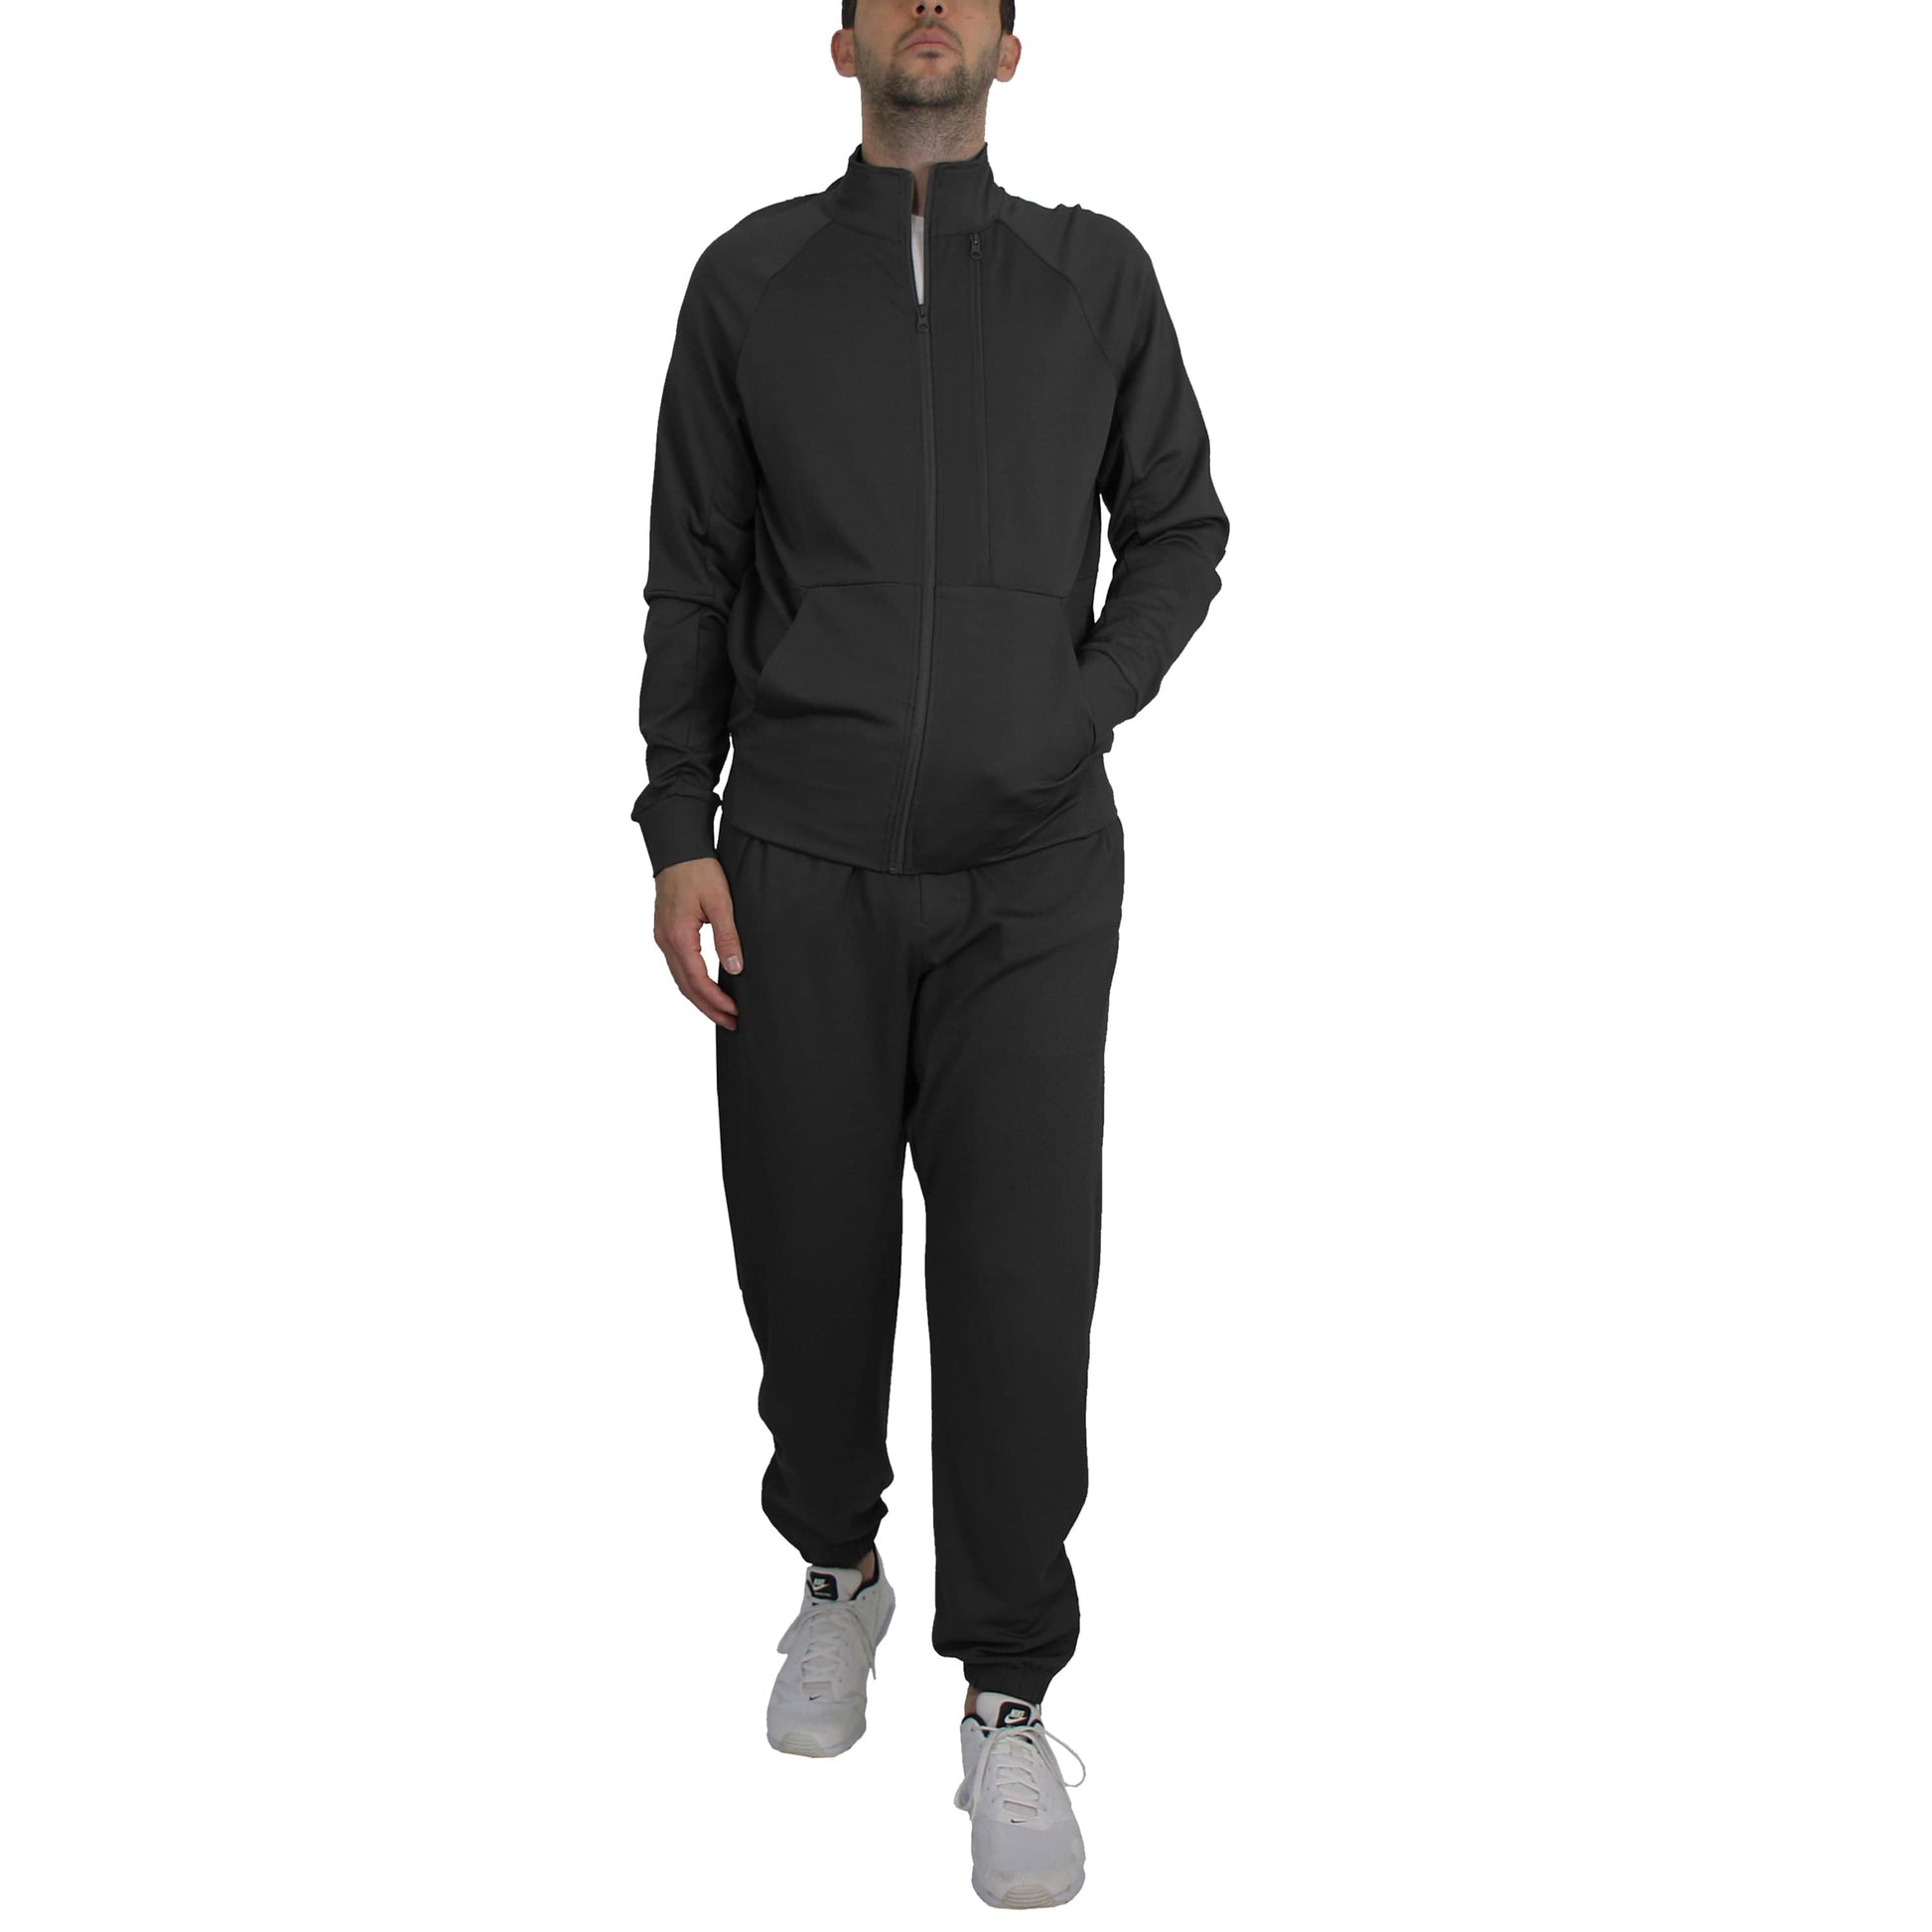 Men's Moisture Wicking Stretch Performance Track Sweater & Jogger 2-Piece Dry Fit Active Set with Reflective Ankle Zipper - GalaxybyHarvic